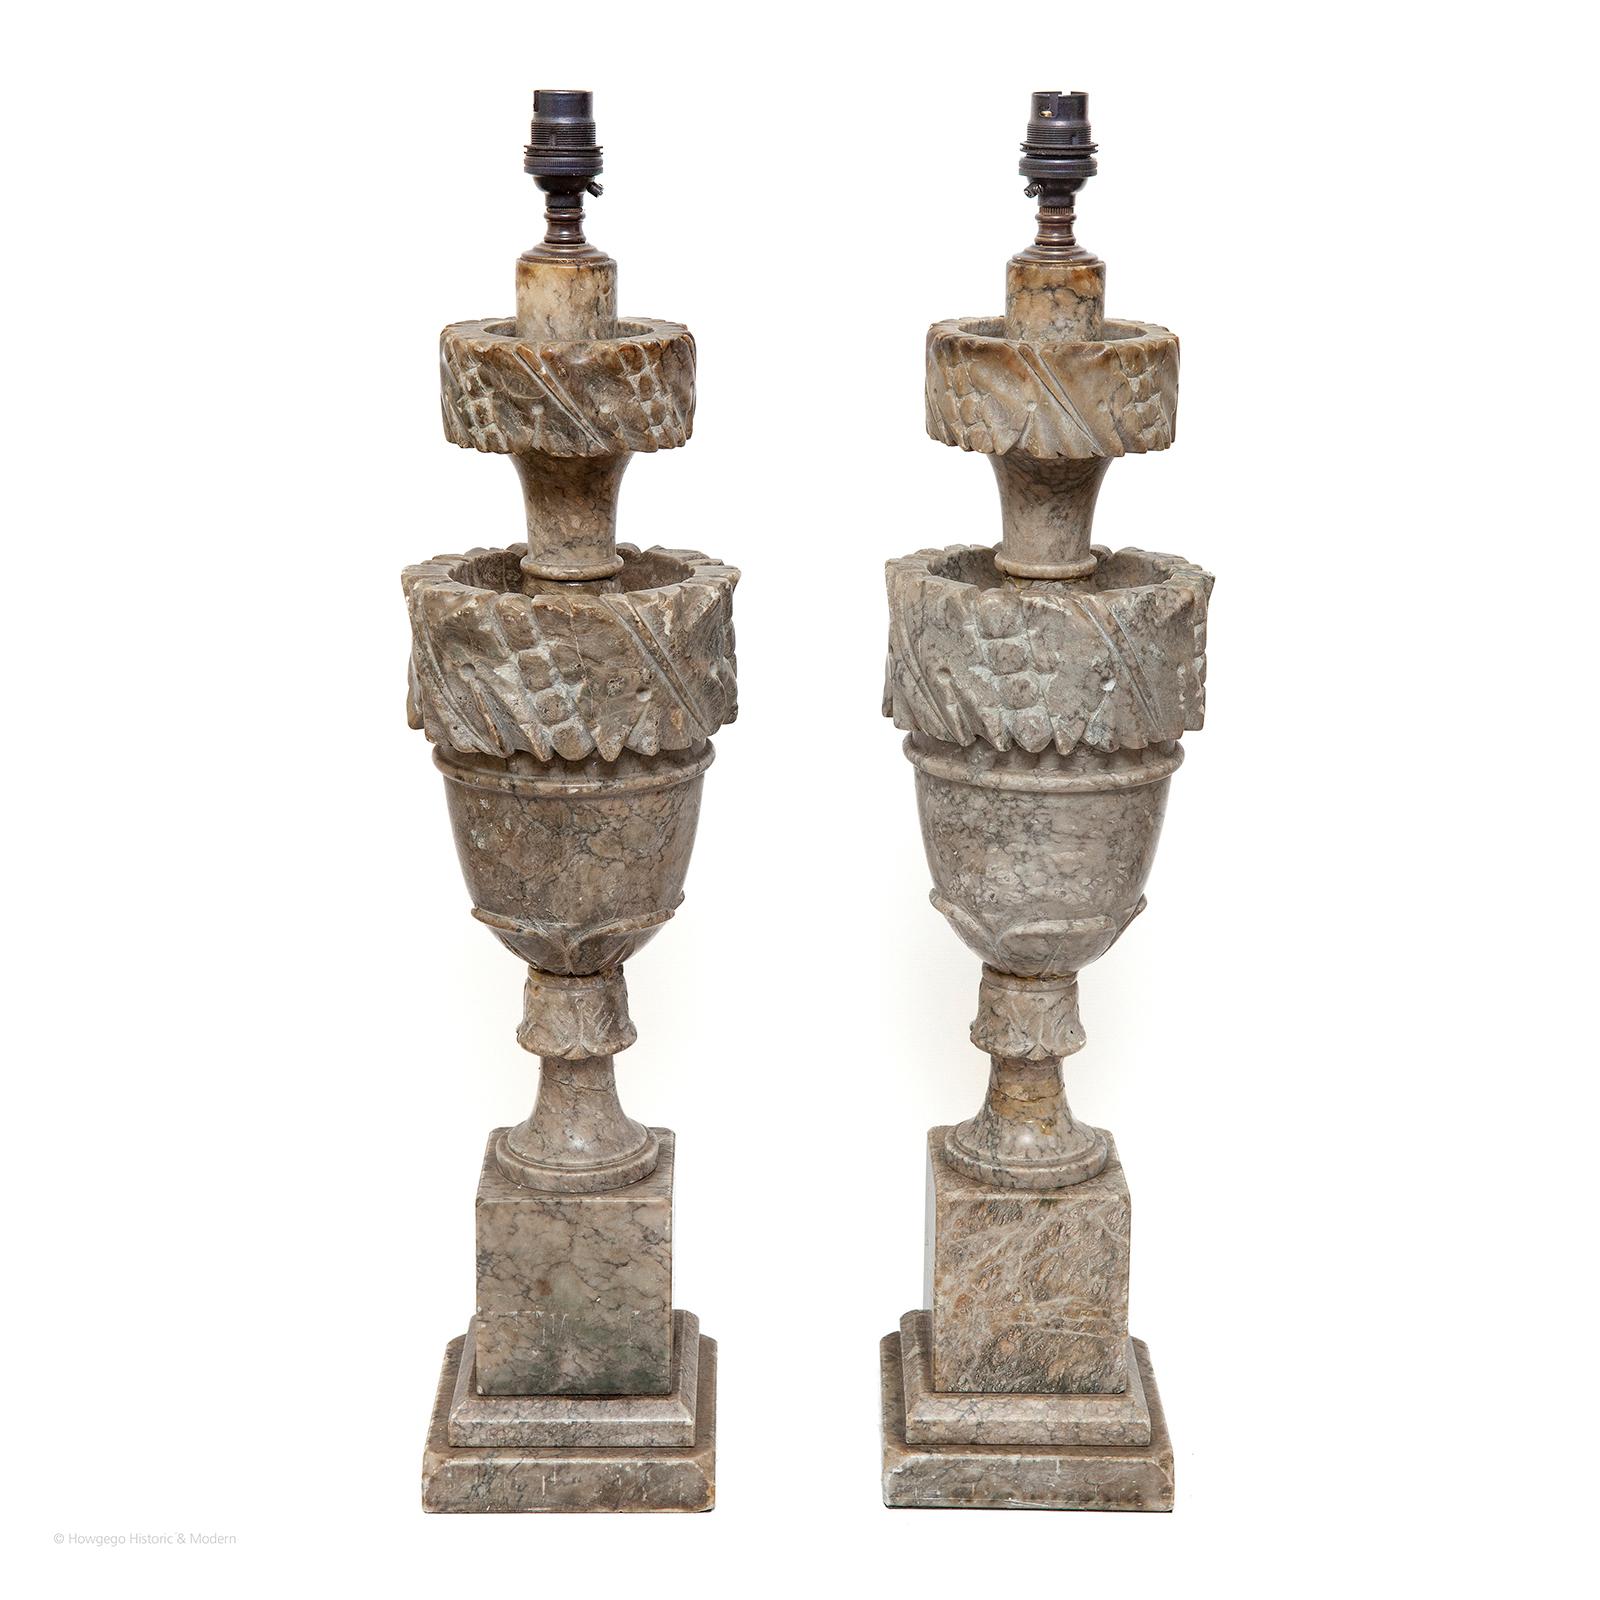 PAIR OF LARGE, 19TH CENTURY, NEO-CLASSICAL, MARBLE CANDLESTICKS UPCYCLED INTO TABLE LAMPS, 21” HIGH, 

Elegant neoclassical style inspired by antiquity
The marble has a soft earth palette with ochre tones and an aged patina.
Simple classical form